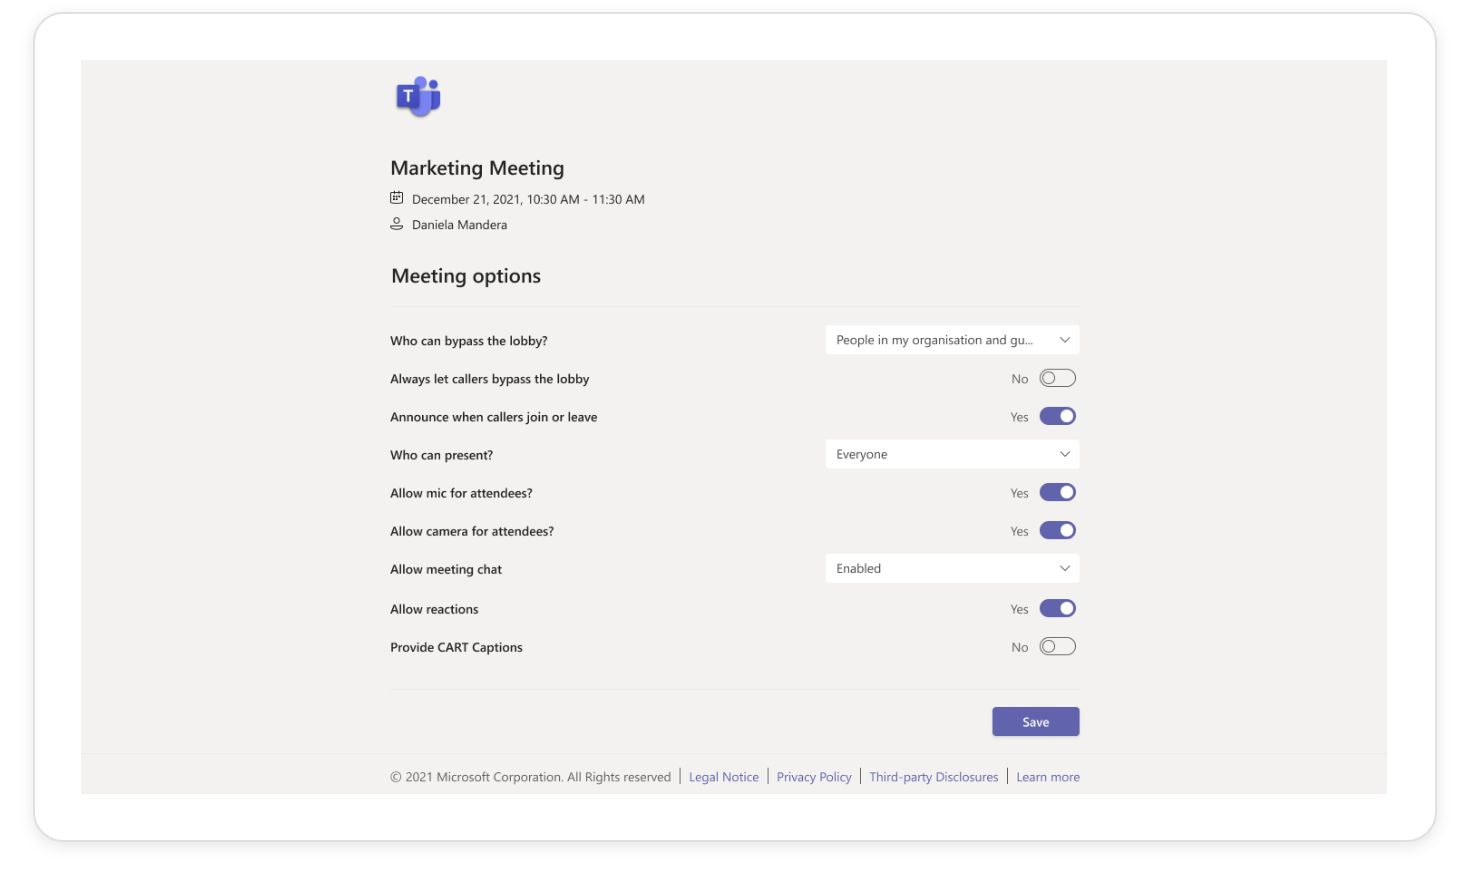 Meeting options page with rows of settings where a user can select from a dropdown or toggle on or off.